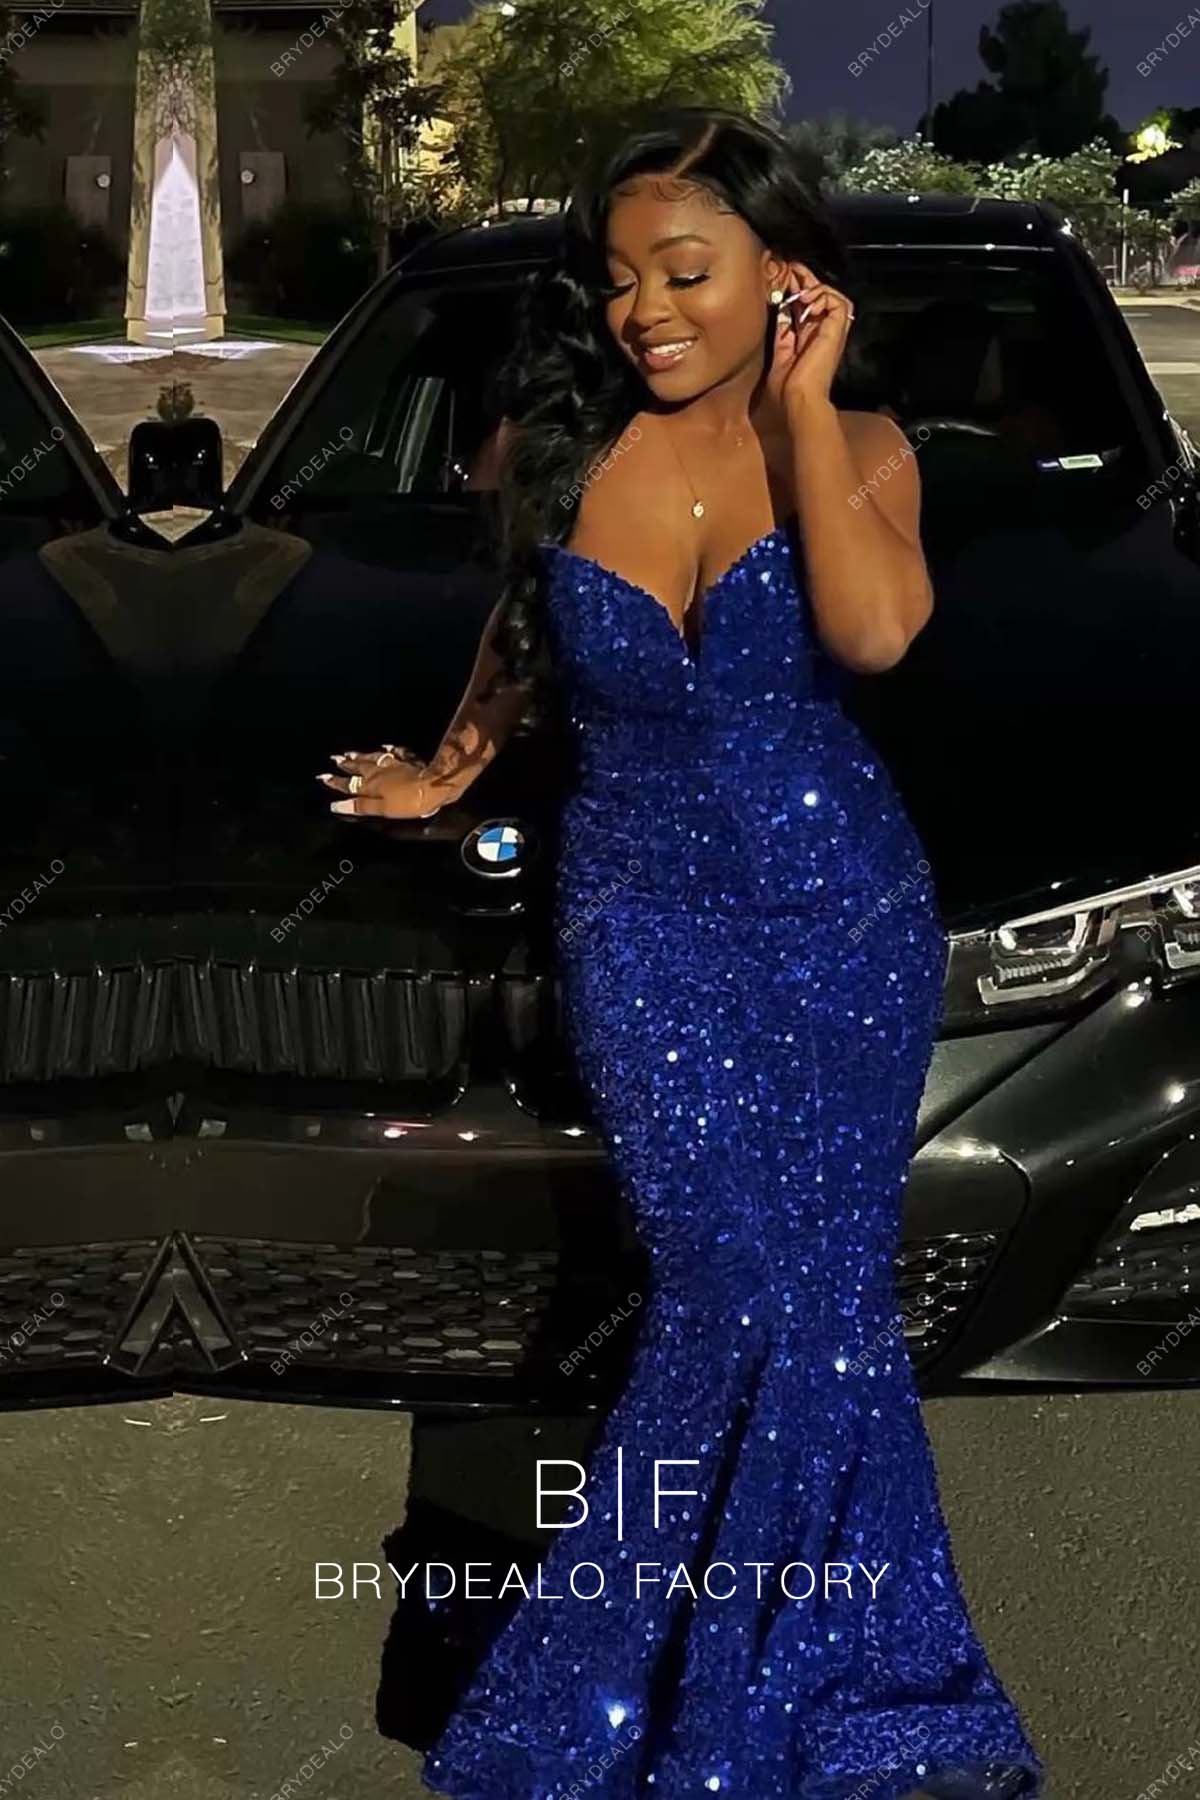 Royal Blue Stretchy Sequins Strapless Mermaid Prom Dress